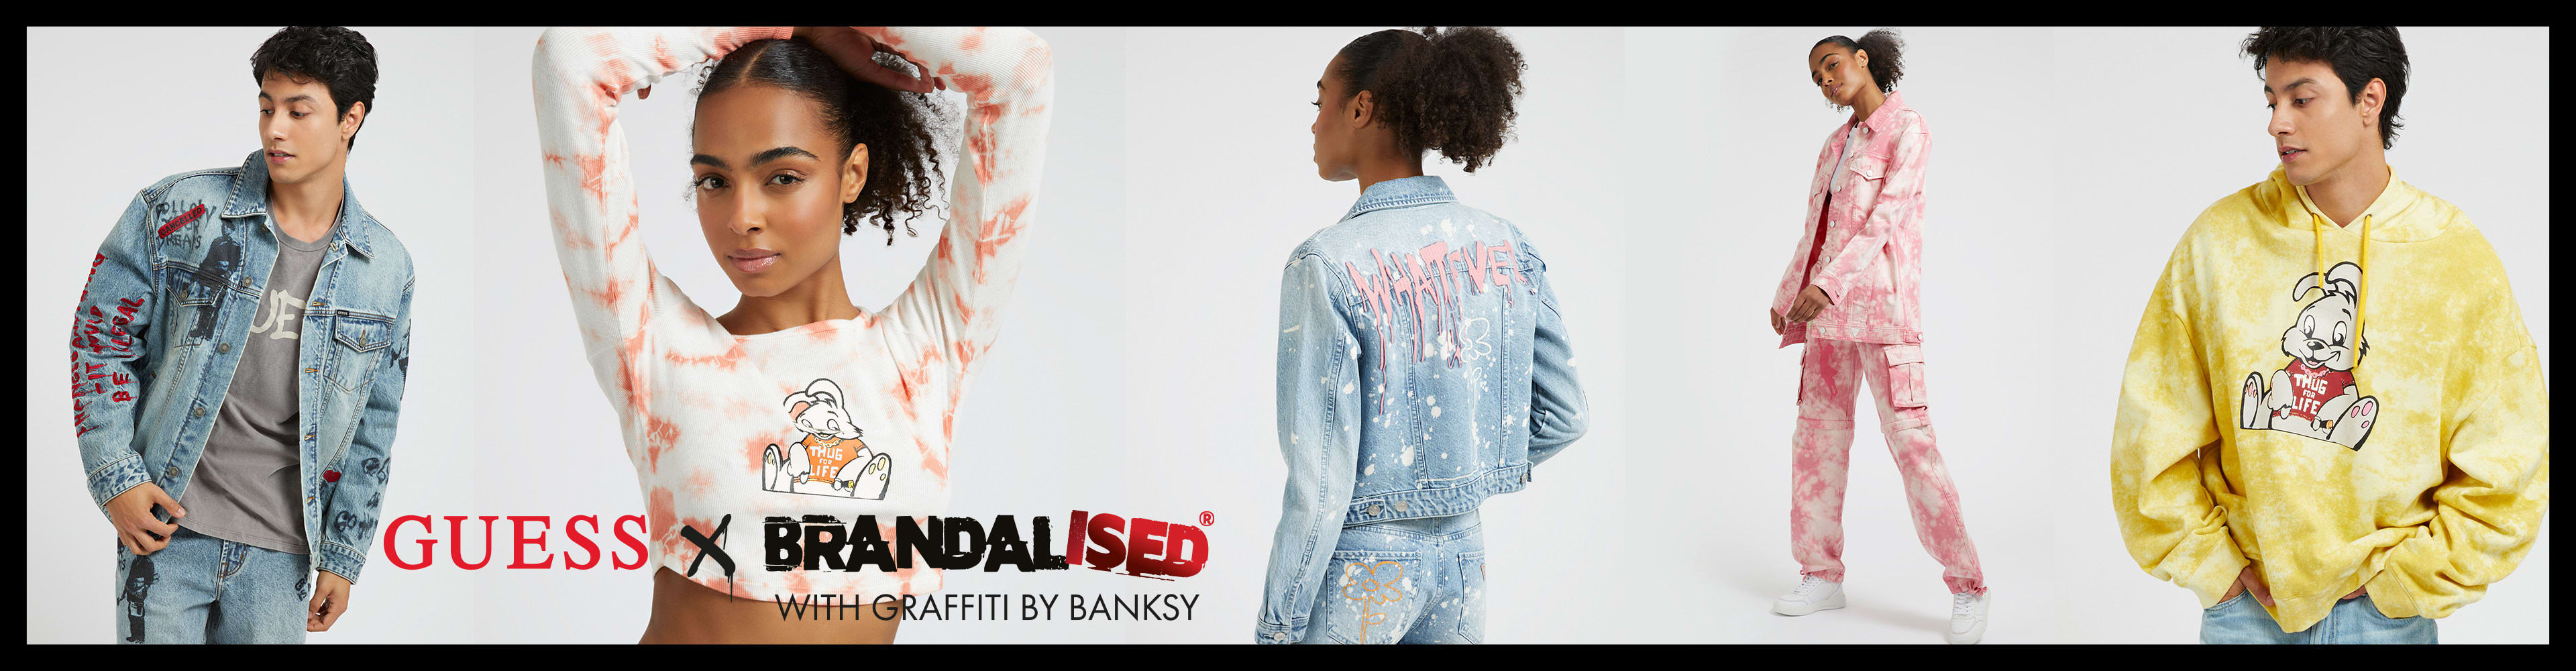 GUESS X BRANDALISED WITH GRAFFITI BY BANKSY COLLECTION